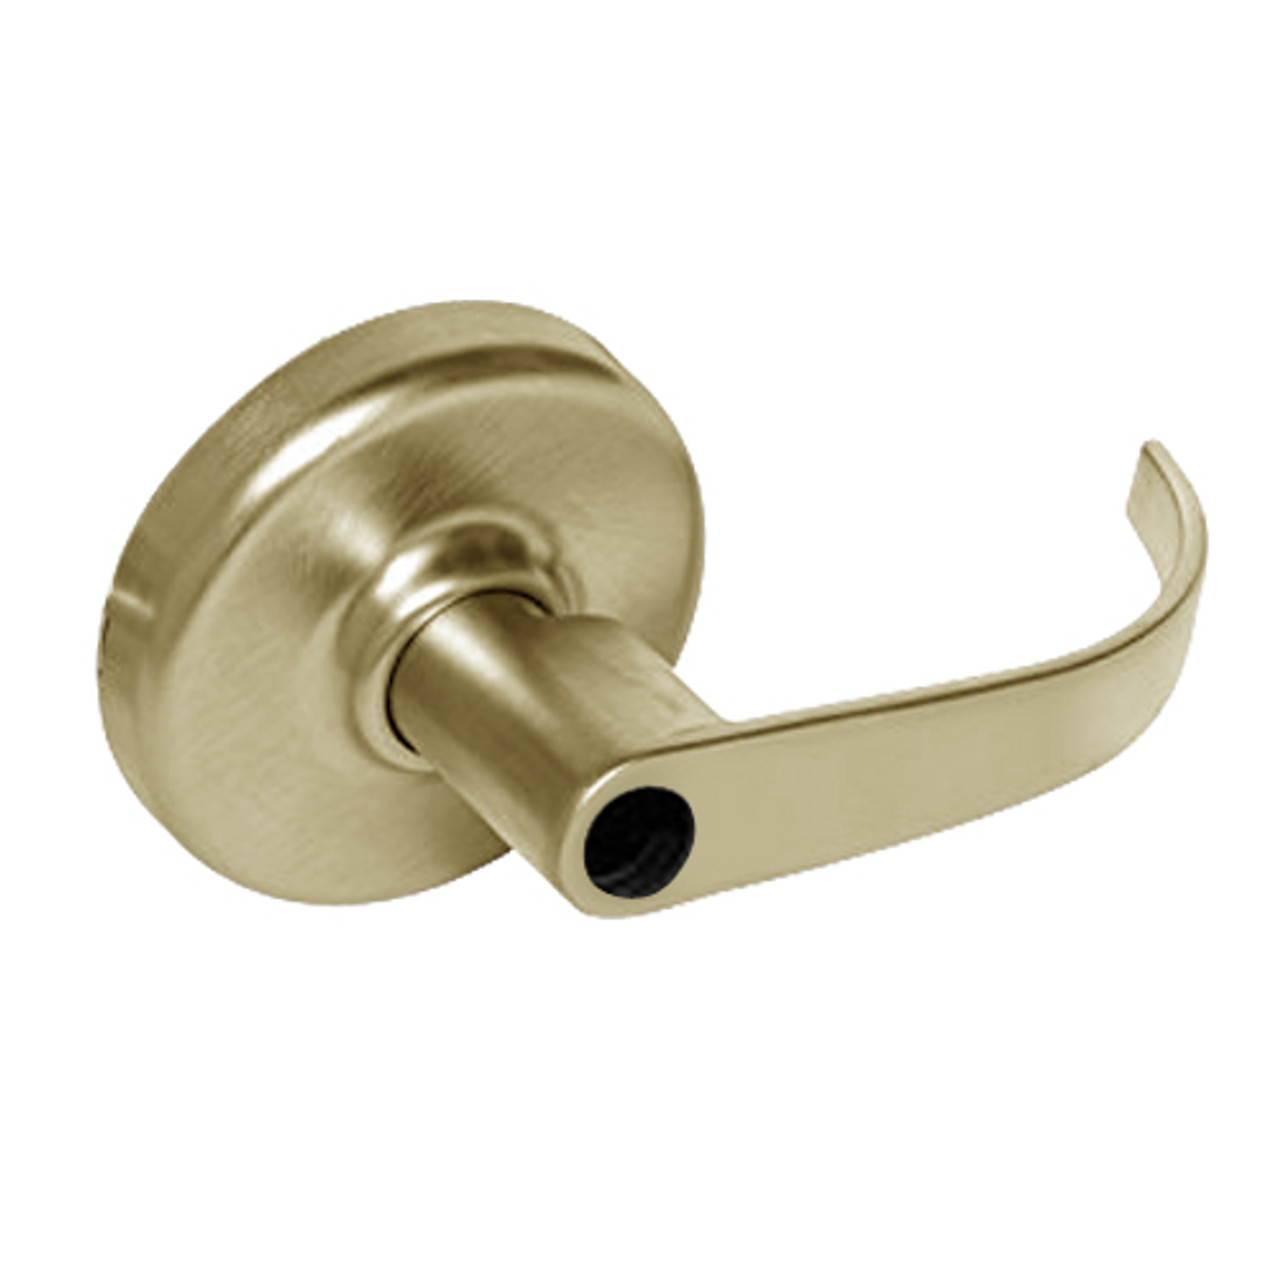 CL3381-PZD-606-LC Corbin CL3300 Series Less Cylinder Extra Heavy Duty Keyed with Blank Plate Cylindrical Locksets with Princeton Lever in Satin Brass Finish